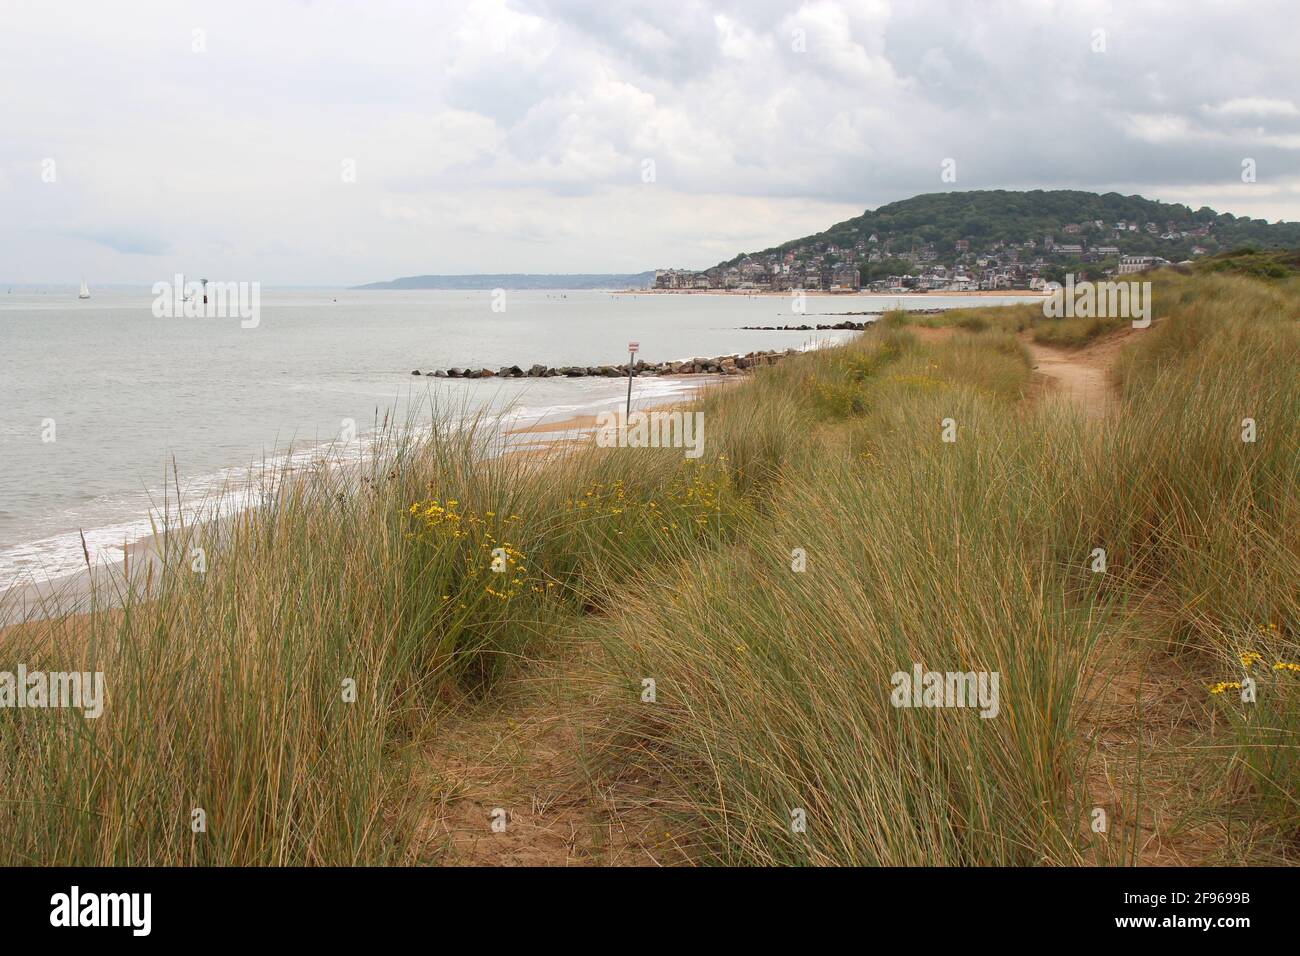 in cabourg in normandy (france) Stock Photo